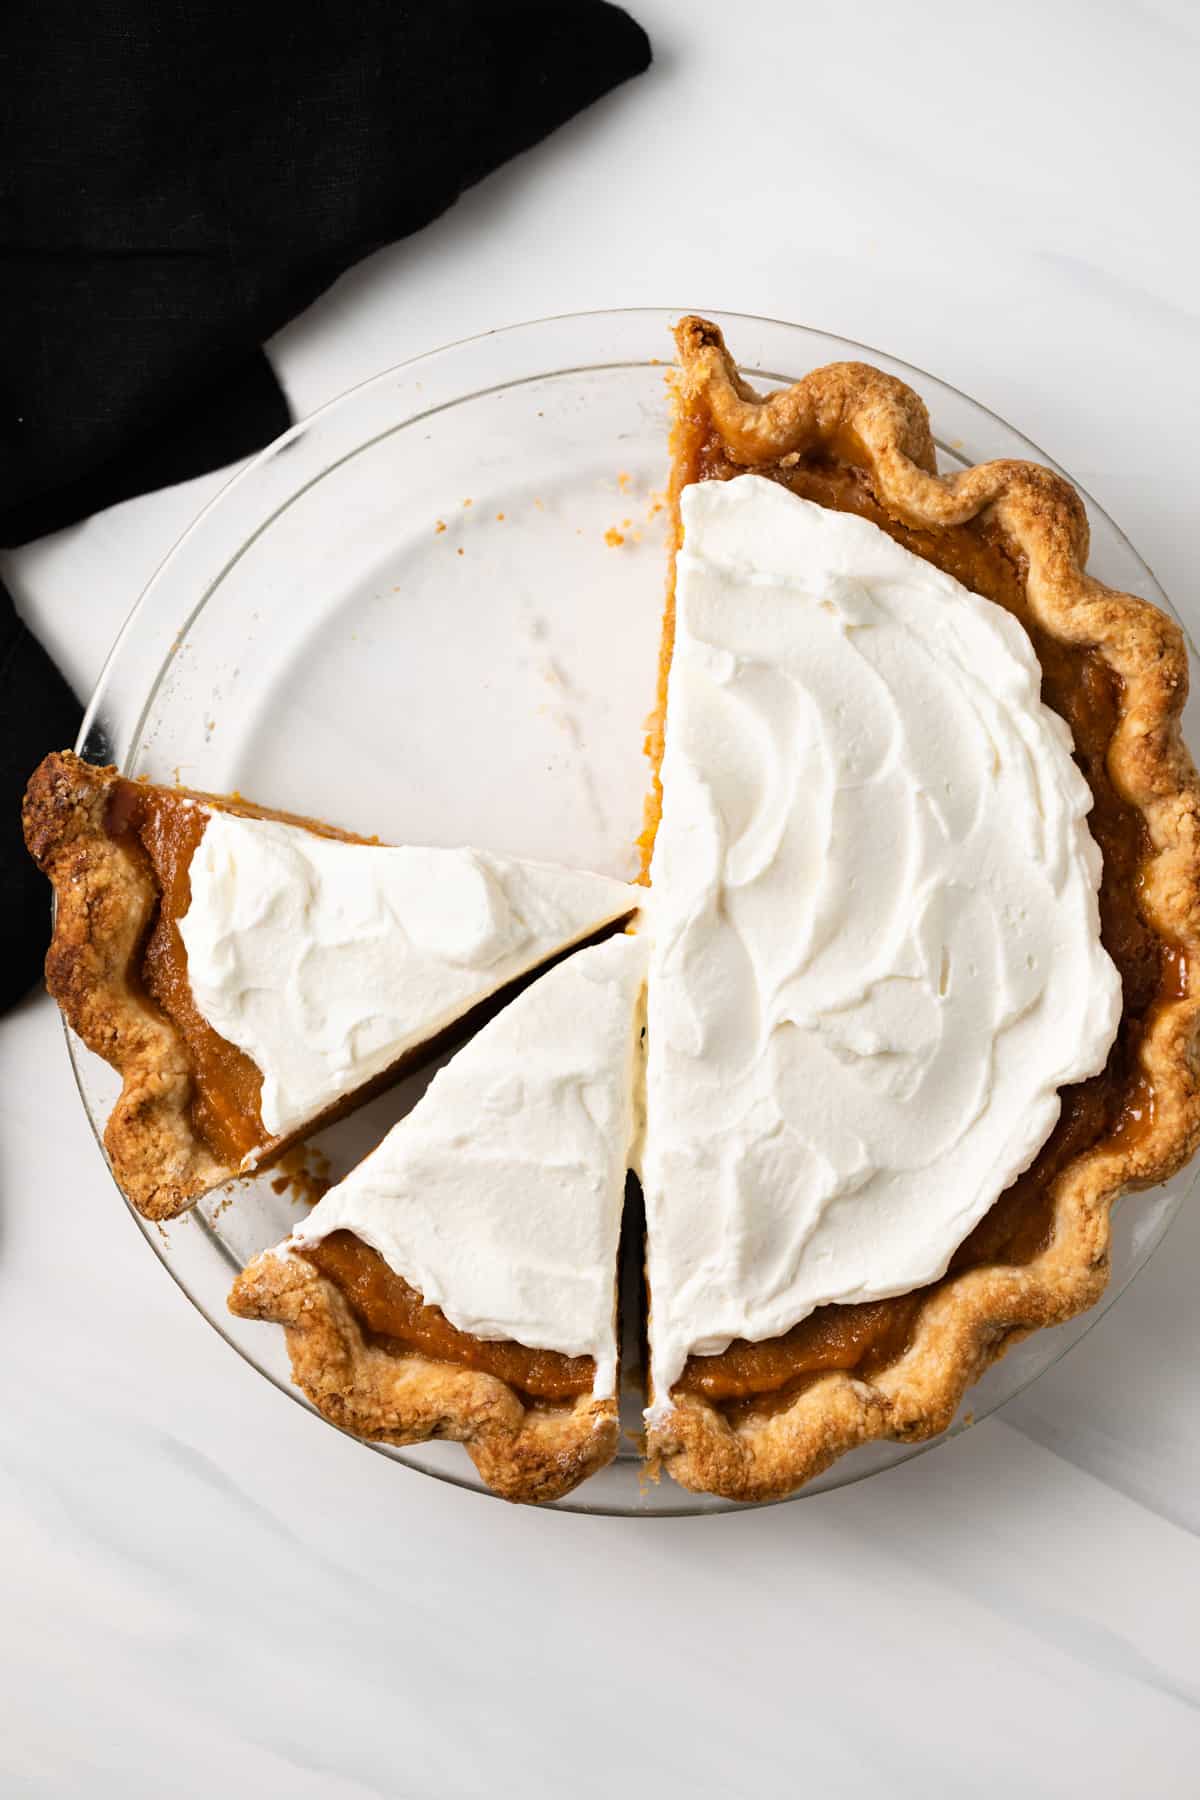 Homemade sweet potato pie topped with whipped cream